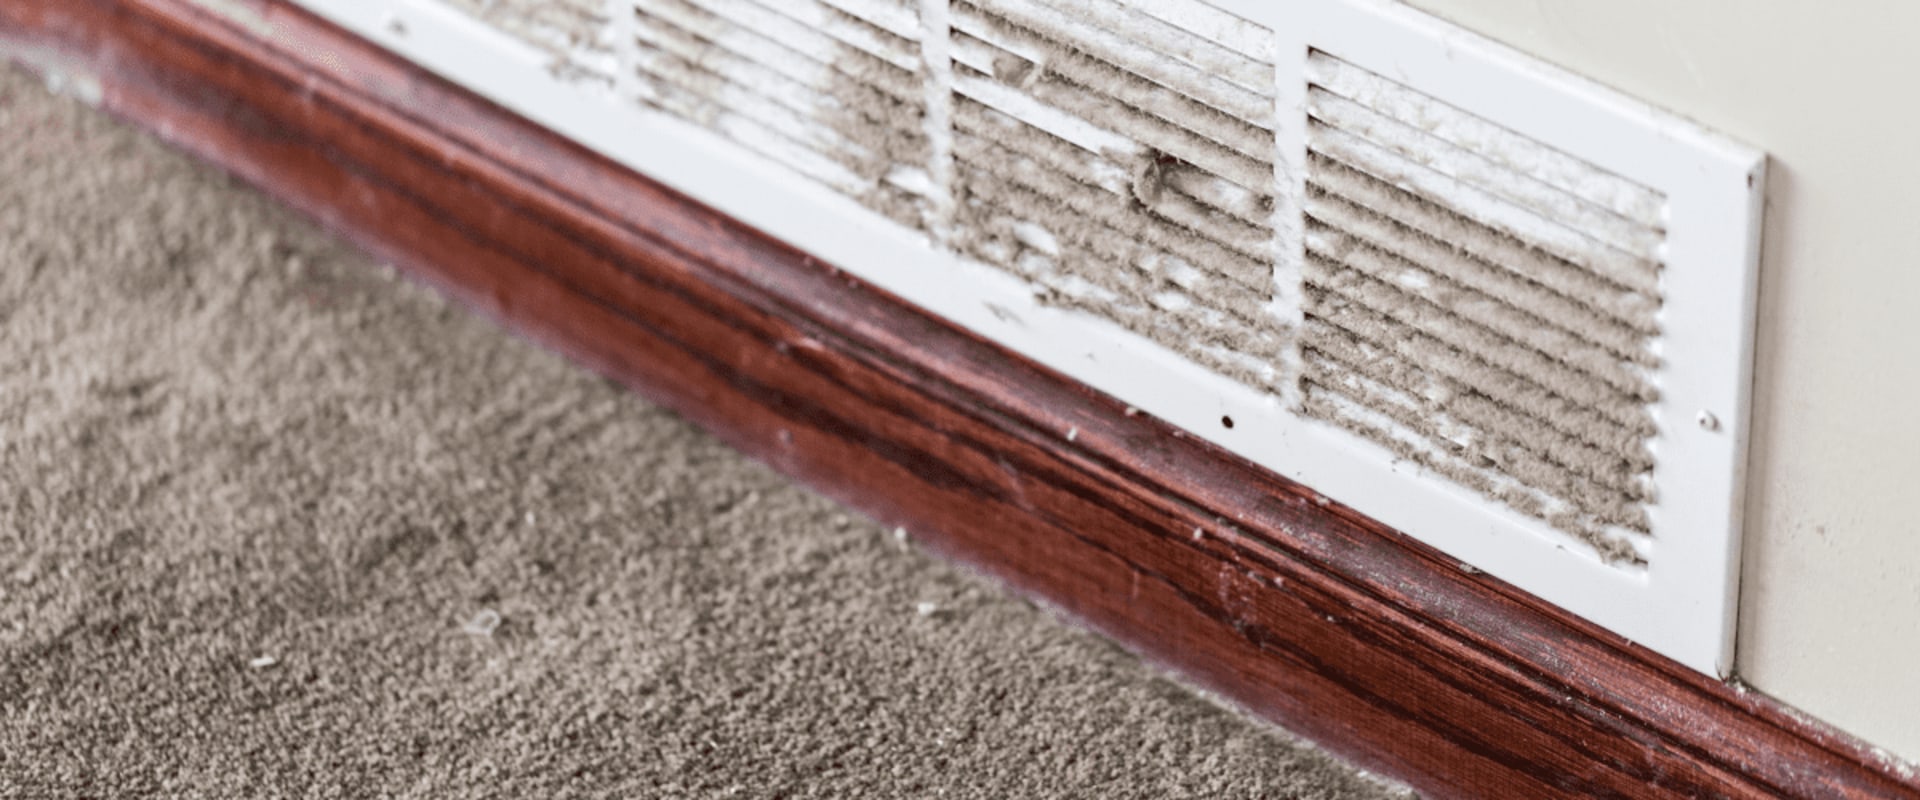 Do You Need to Seal Your Home's Ducts in Florida? - A Guide